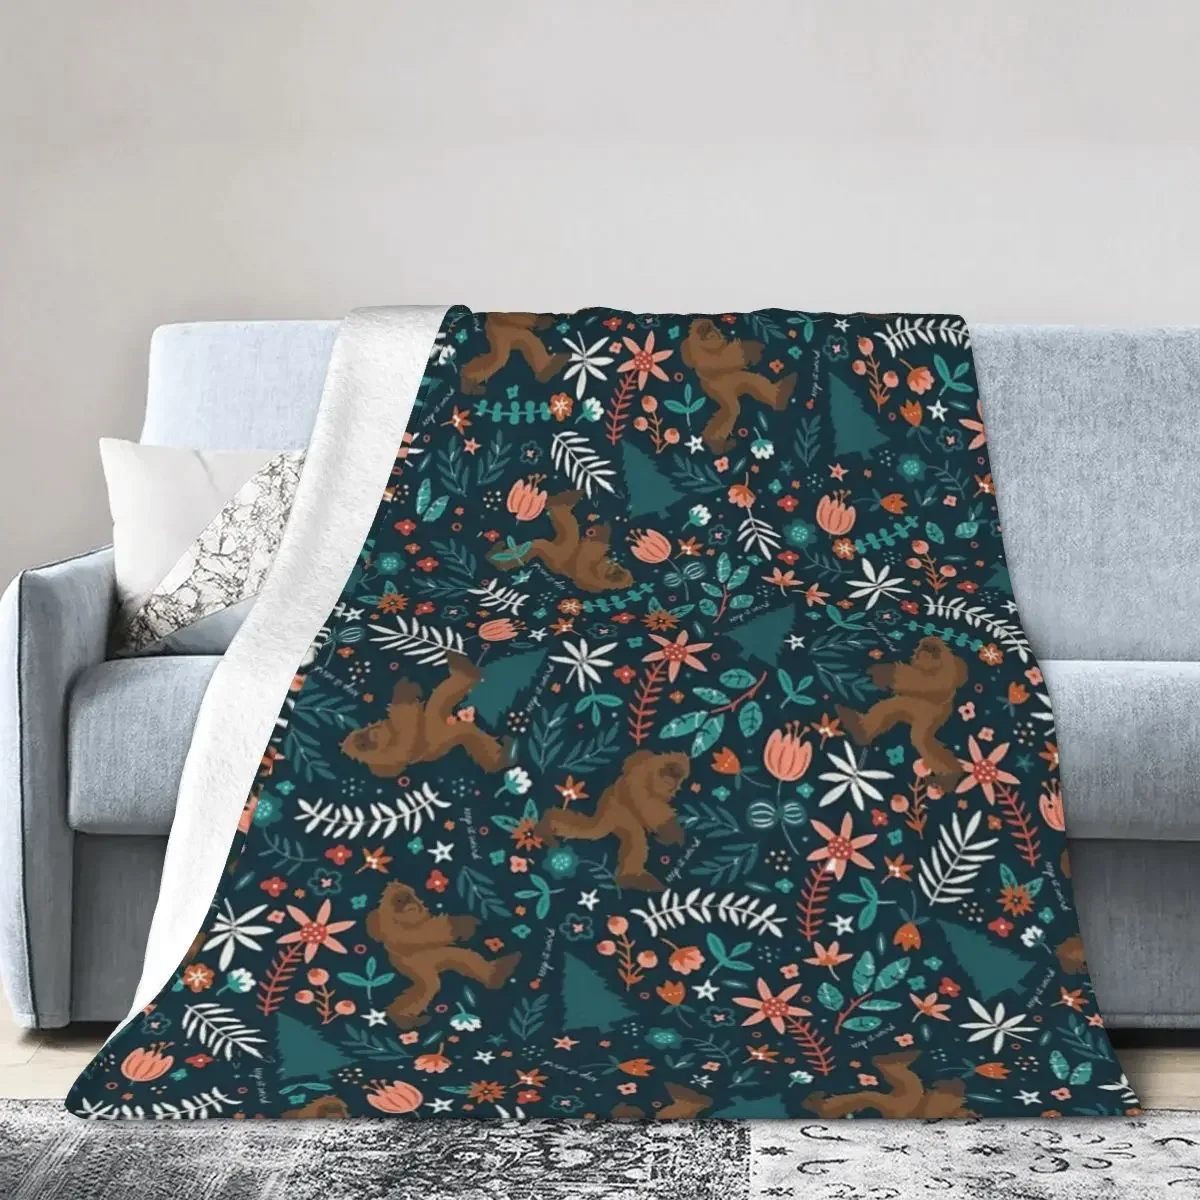 

Bigfoot Keep It Weird Blanket Soft Warm Flannel Throw Blanket Bedspread for Bed Living room Picnic Travel Home Couch